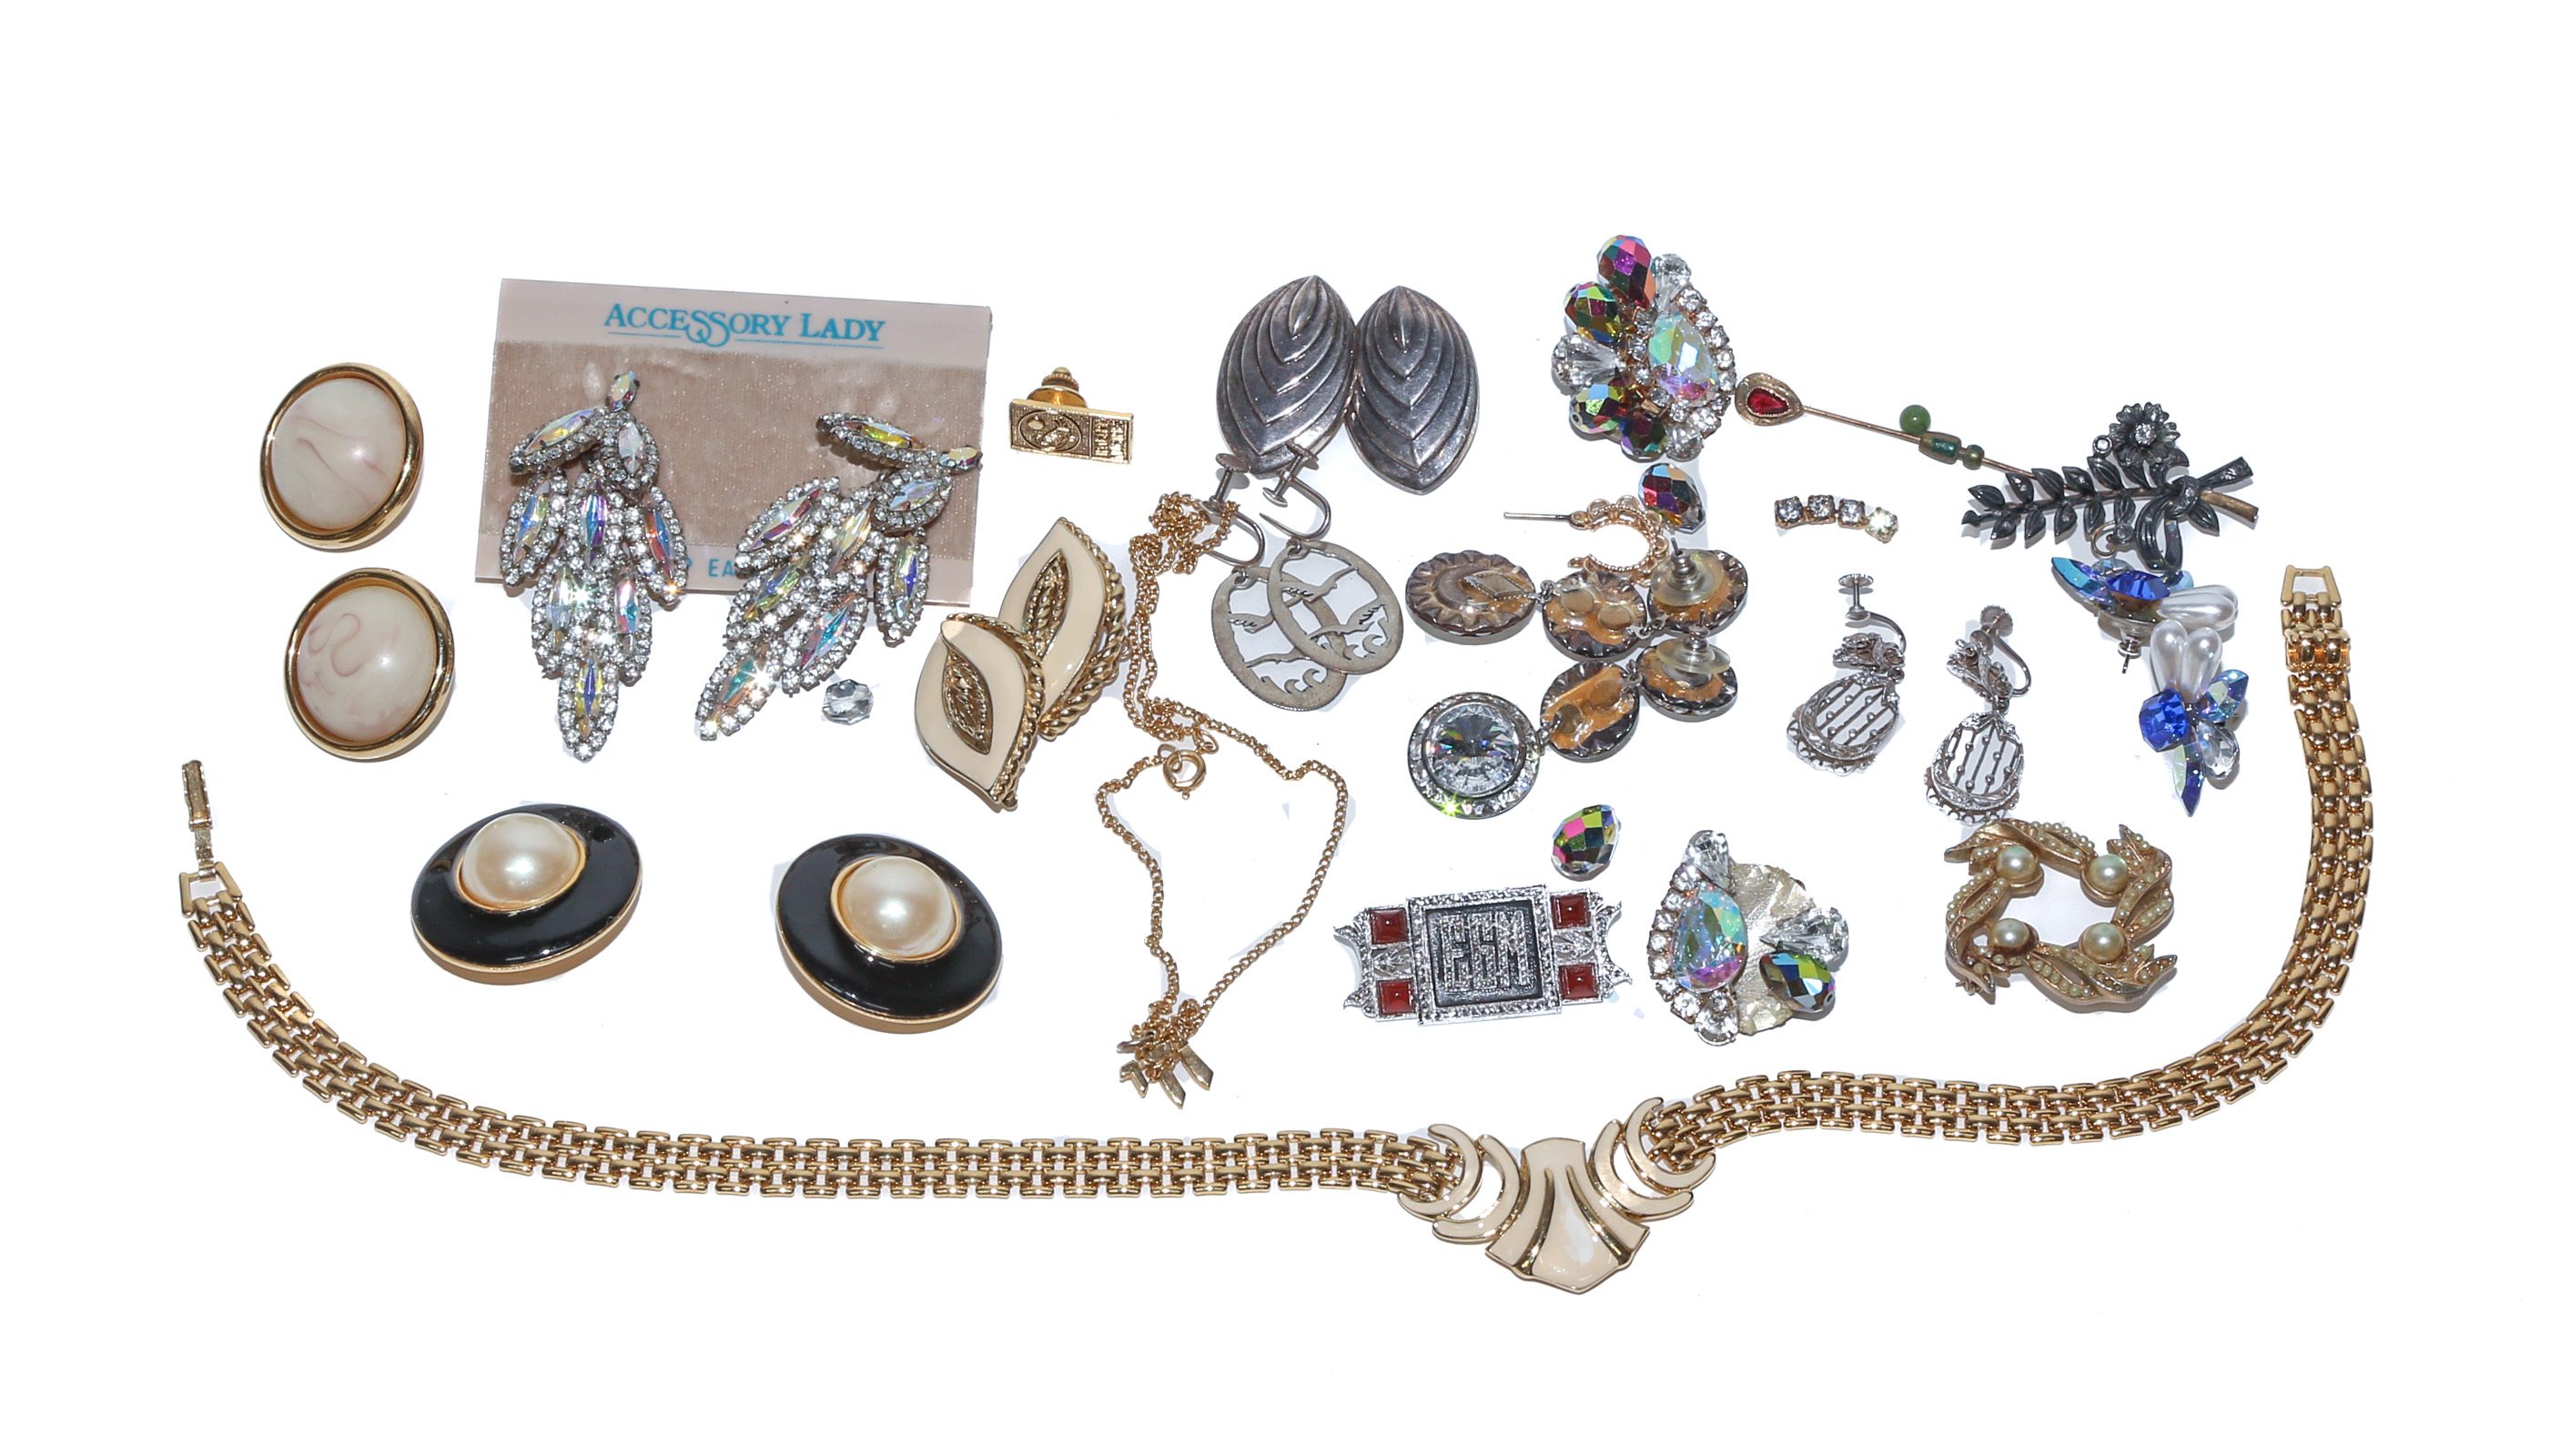 A COLLECTION OF FASHION JEWELRY